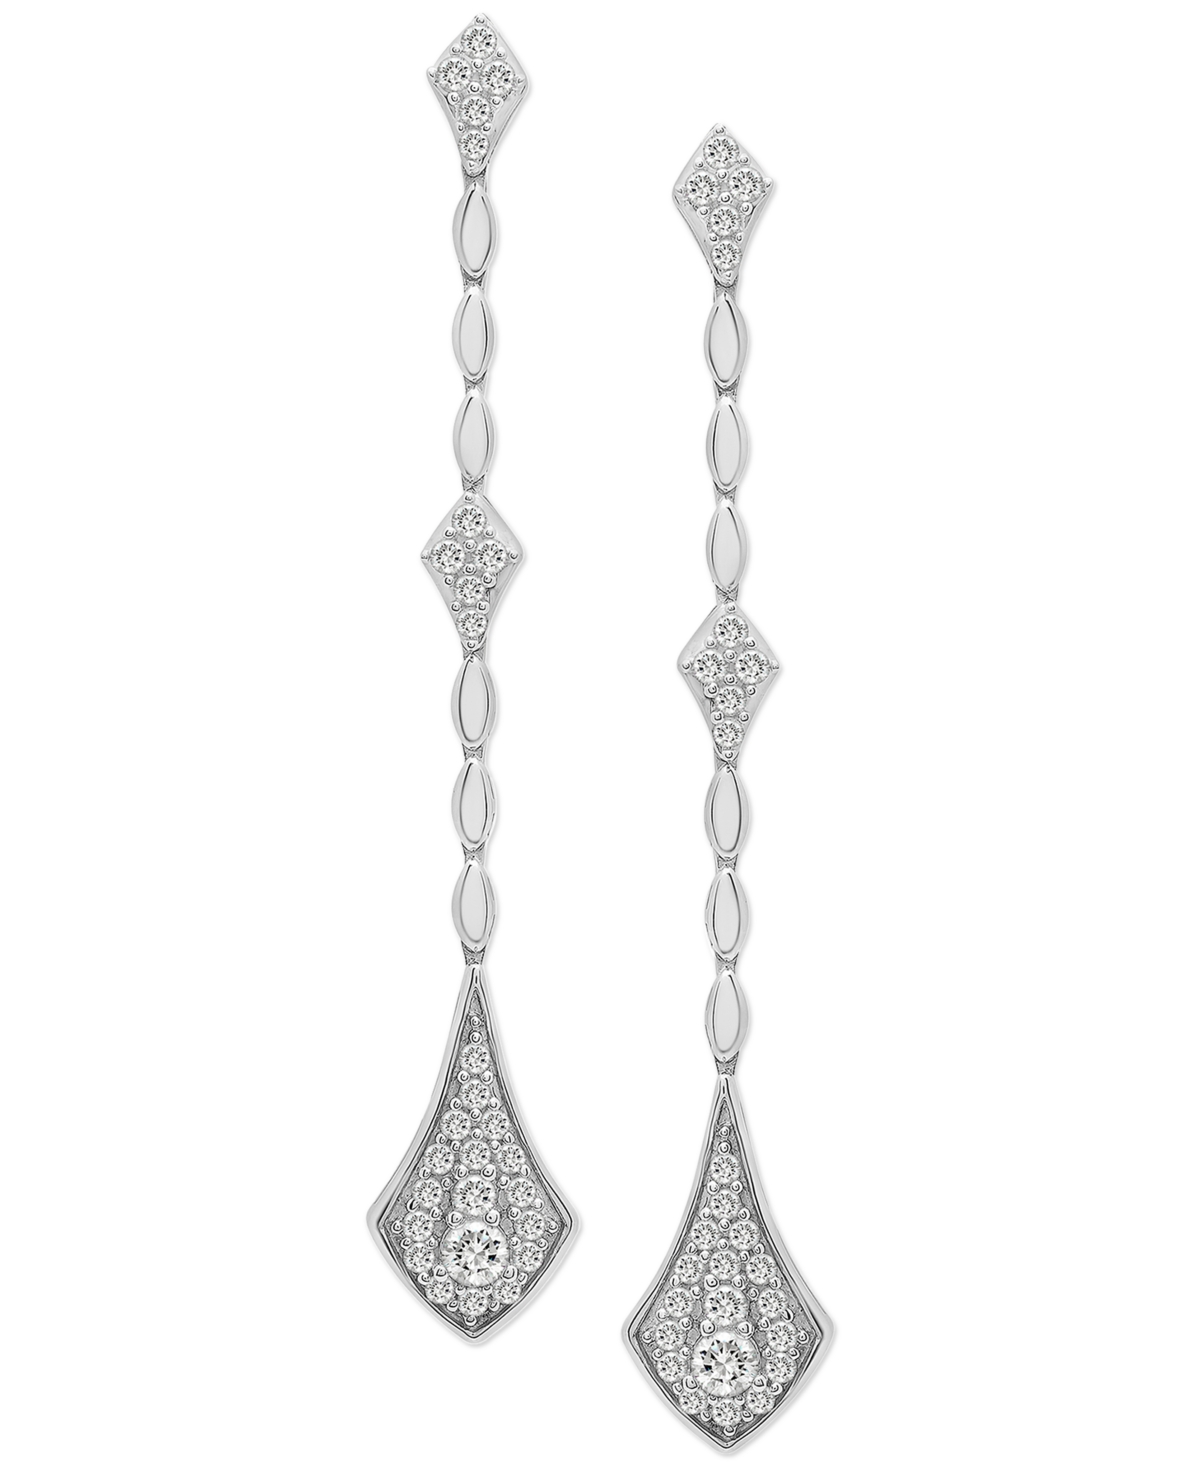 Diamond Linear Drop Earrings (1 ct. t.w.) in 14k Gold or 14k White Gold, Created for Macy's - White Gold